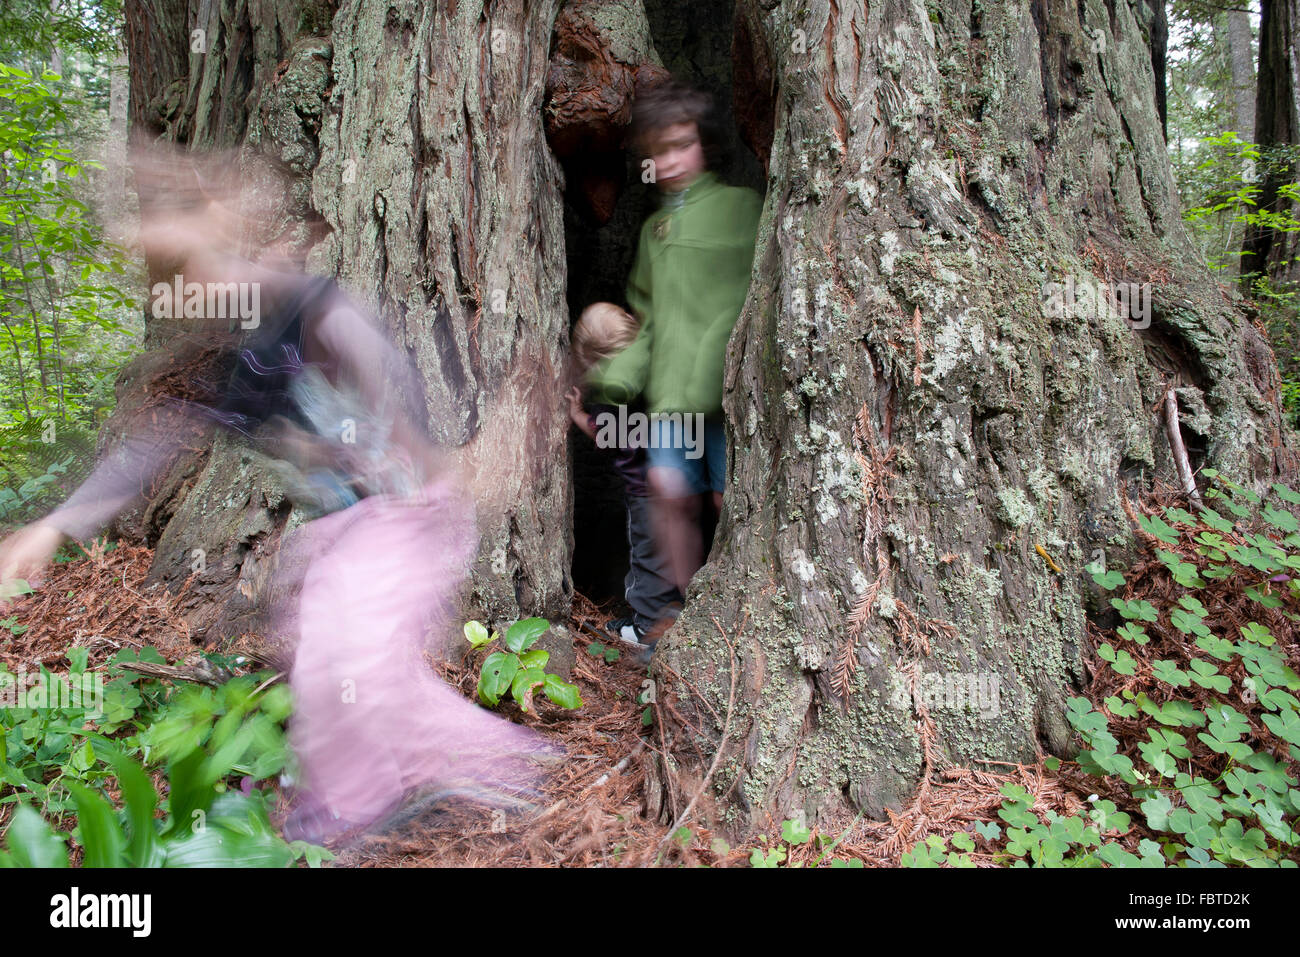 Children playing in hollow tree trunk Stock Photo